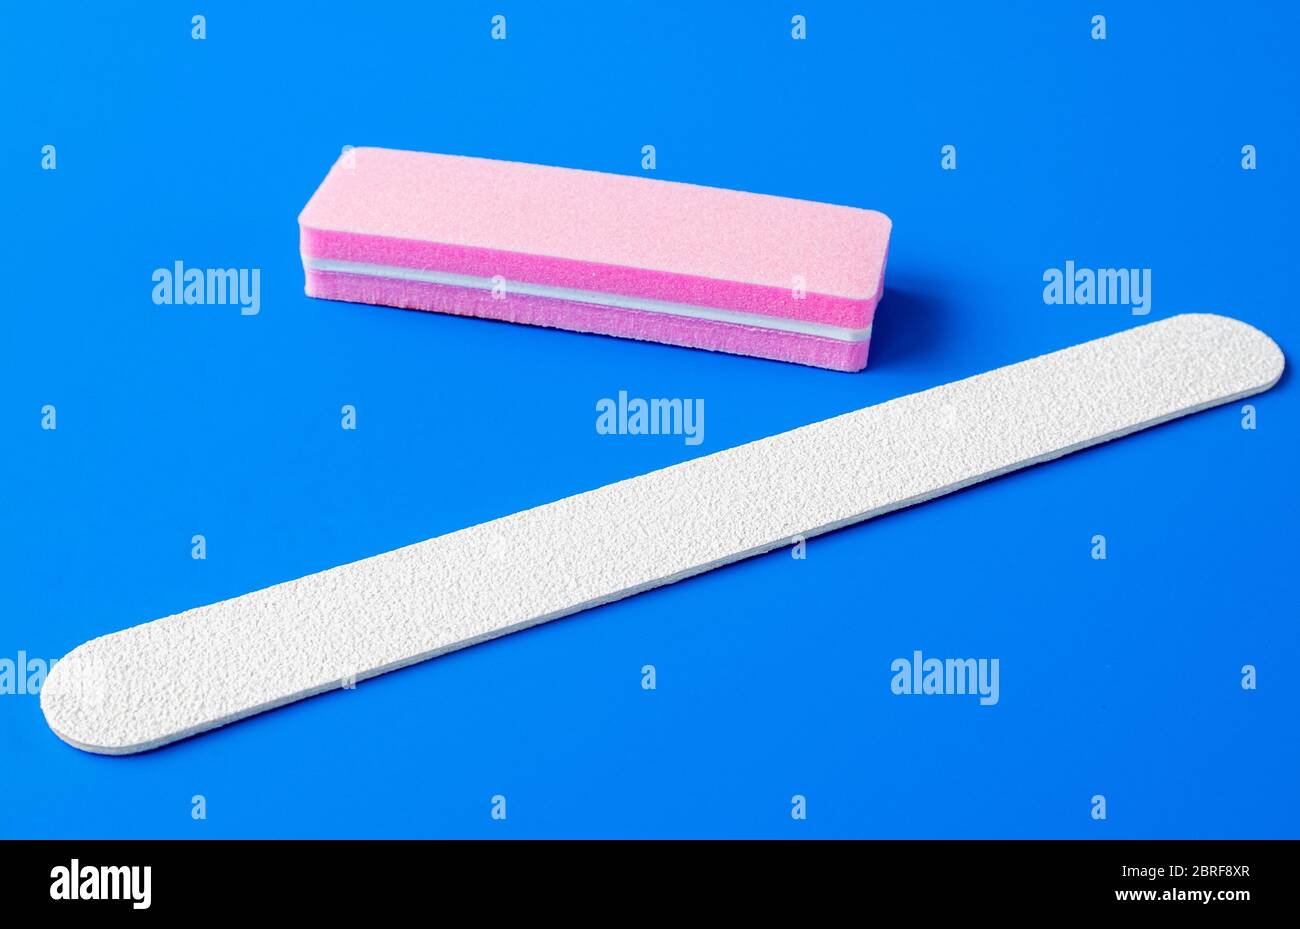 Sanding file sponge for manicure and nailfile on a blue background Stock Photo